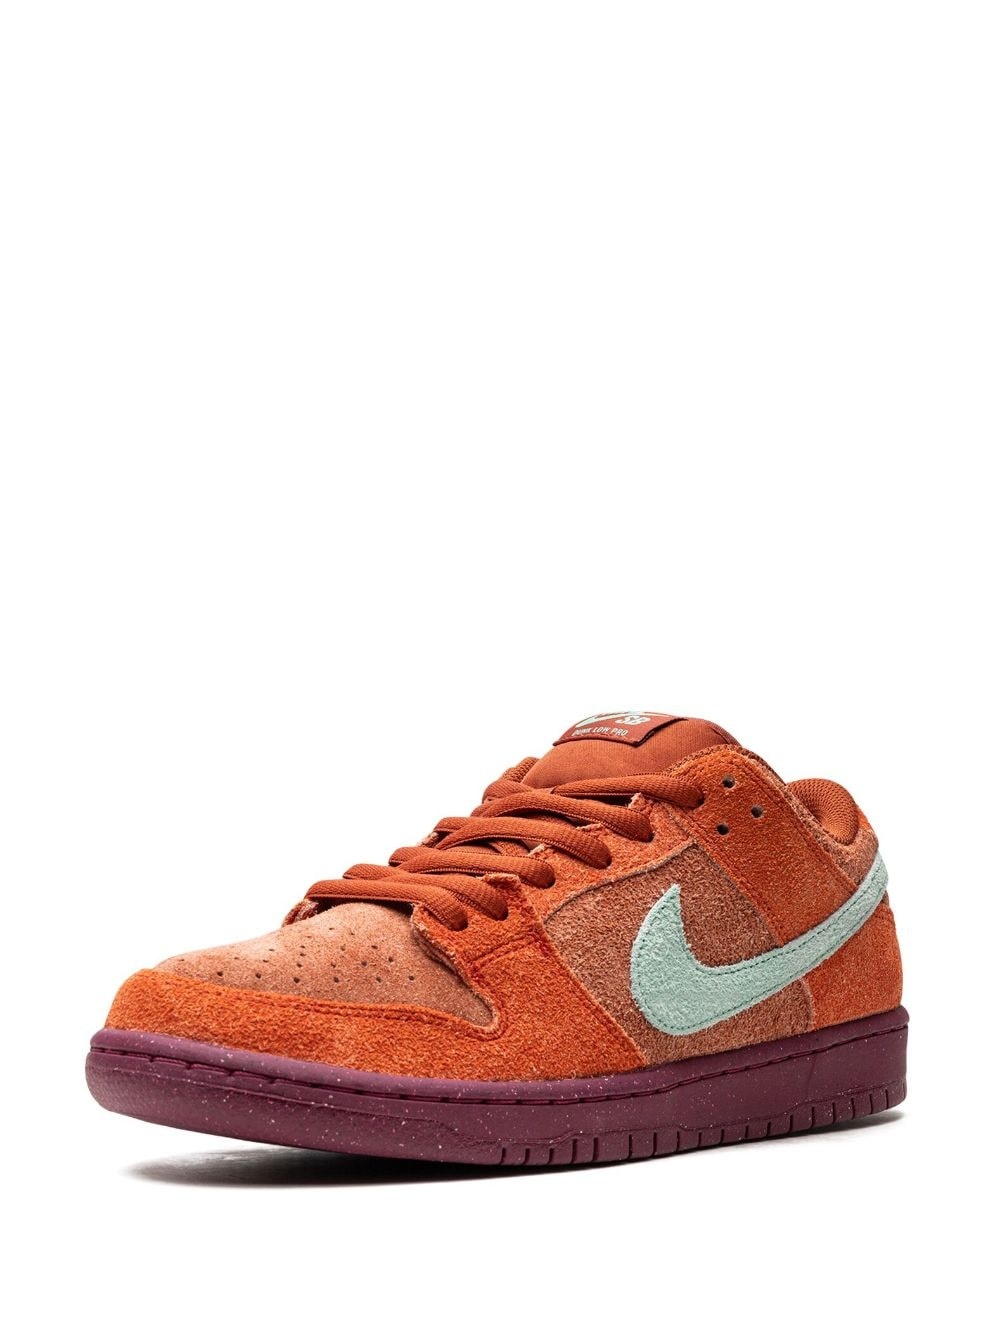 SB Dunk Low Pro Prm "Mystic Red" sneakers - 5